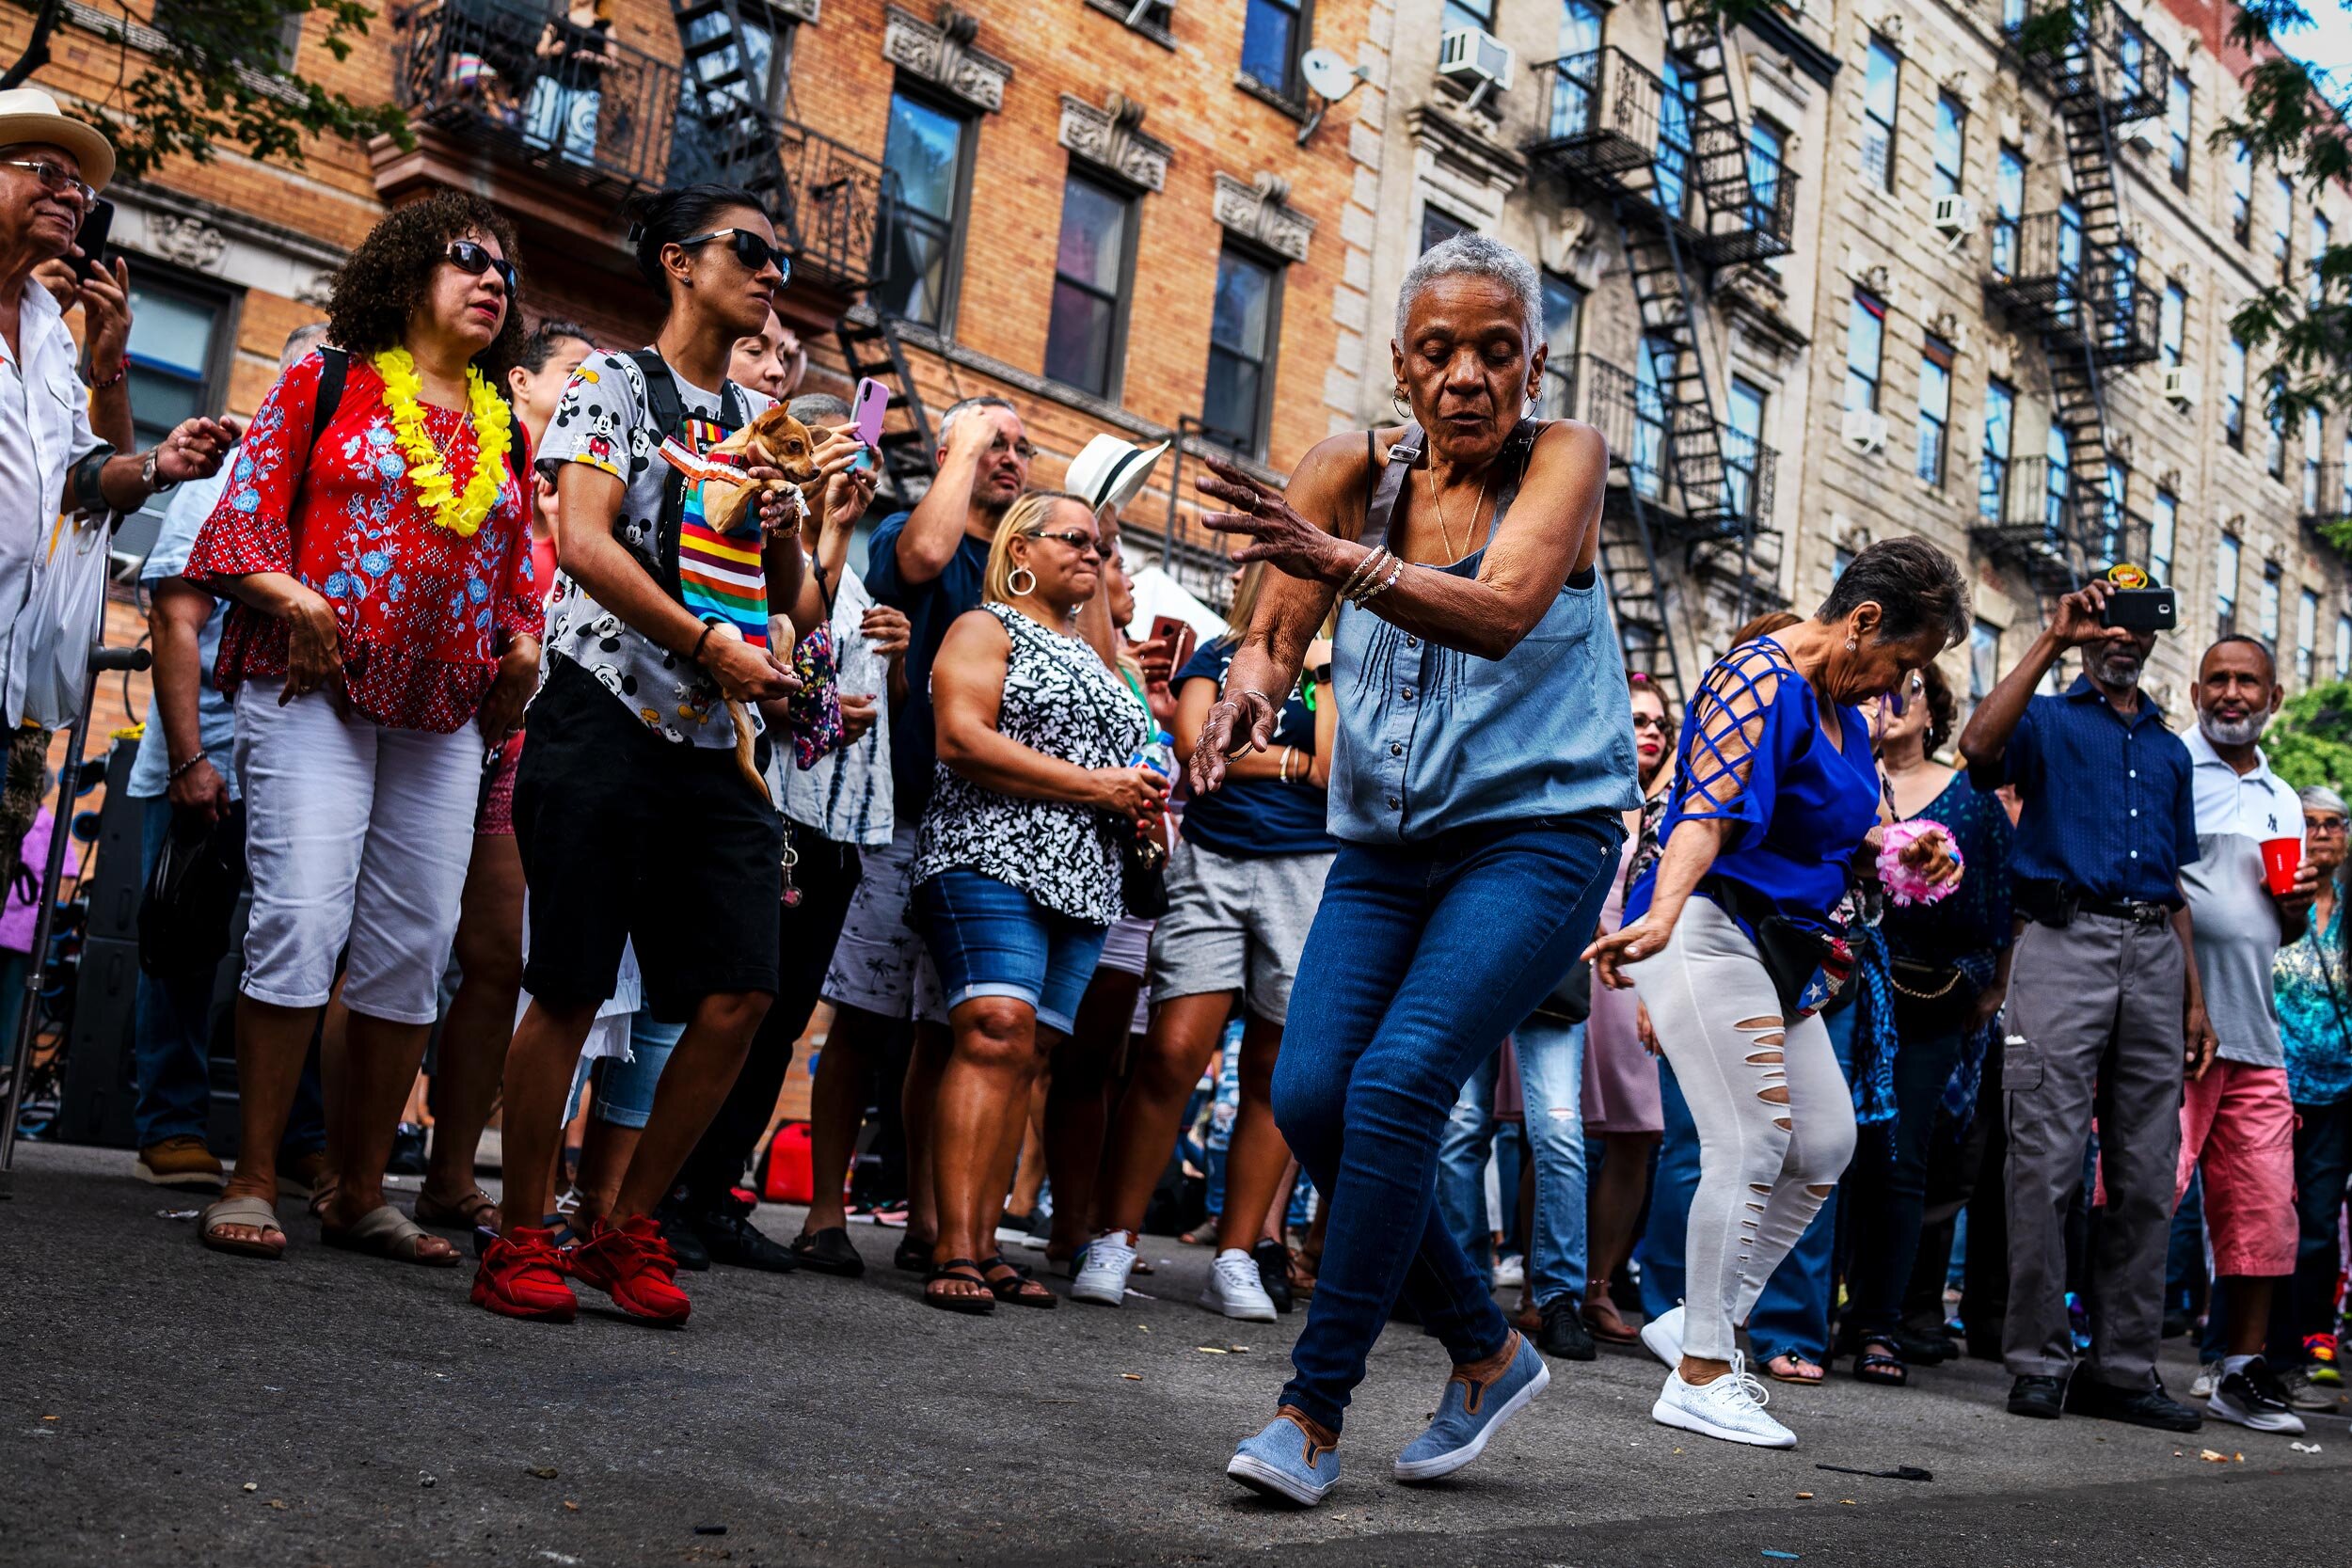  Dancing in the street to live music during the Annual South Side United Block party in Brooklyn, New York. Friends from the 70's, 80's, and 90's gather to celebrate peace and the unity of their community. Williamsburg’s Southside, also known in Span